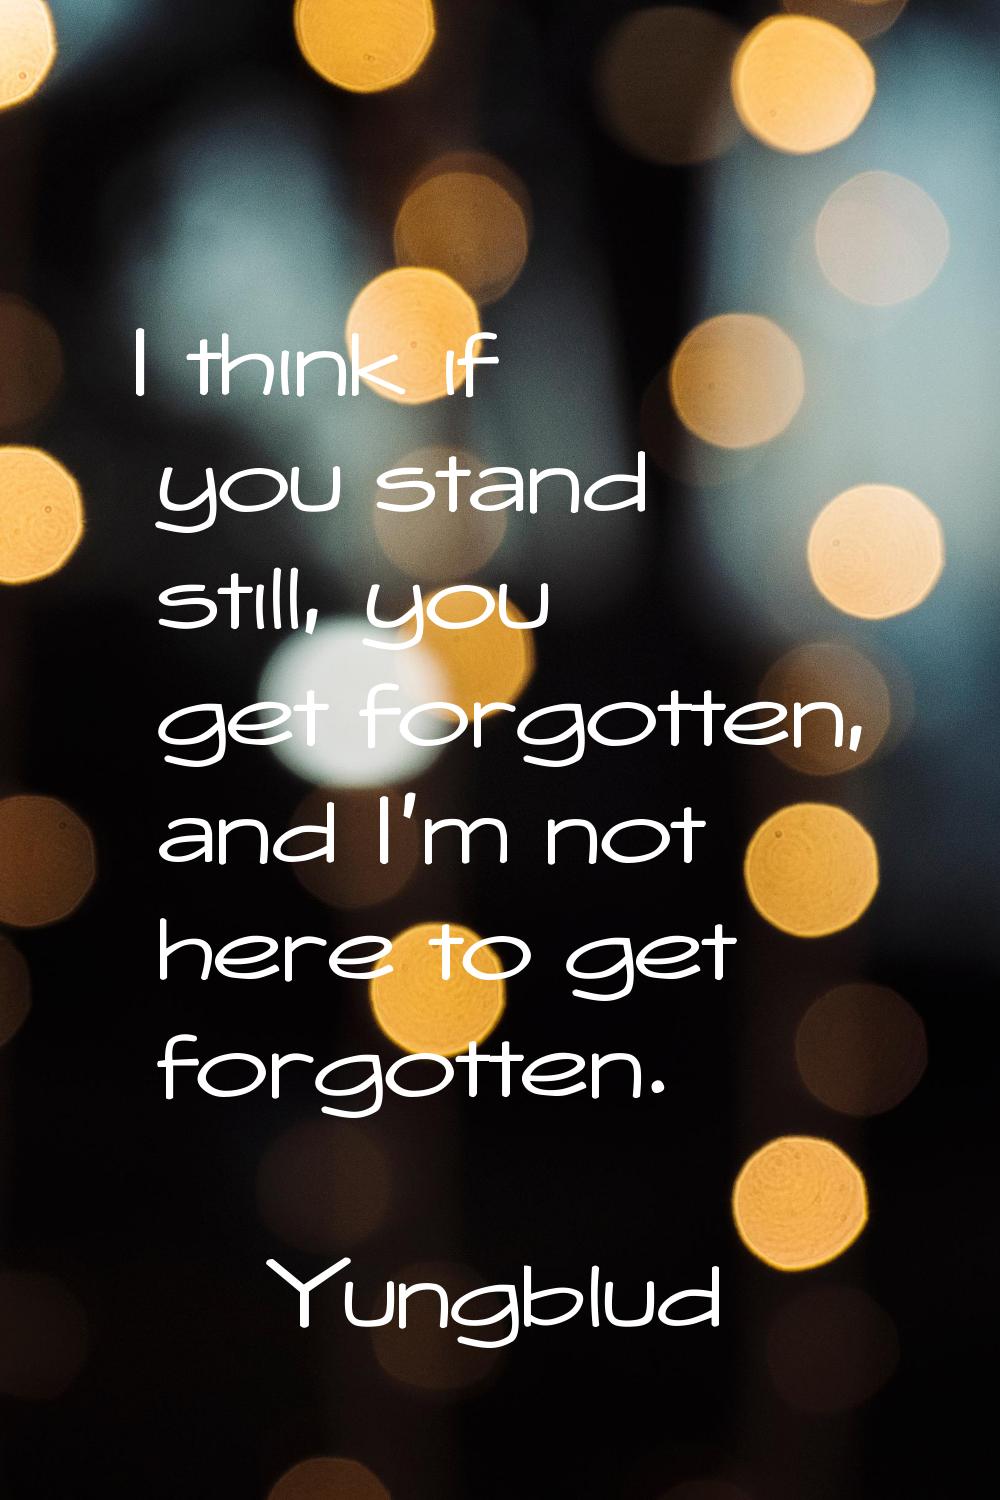 I think if you stand still, you get forgotten, and I'm not here to get forgotten.